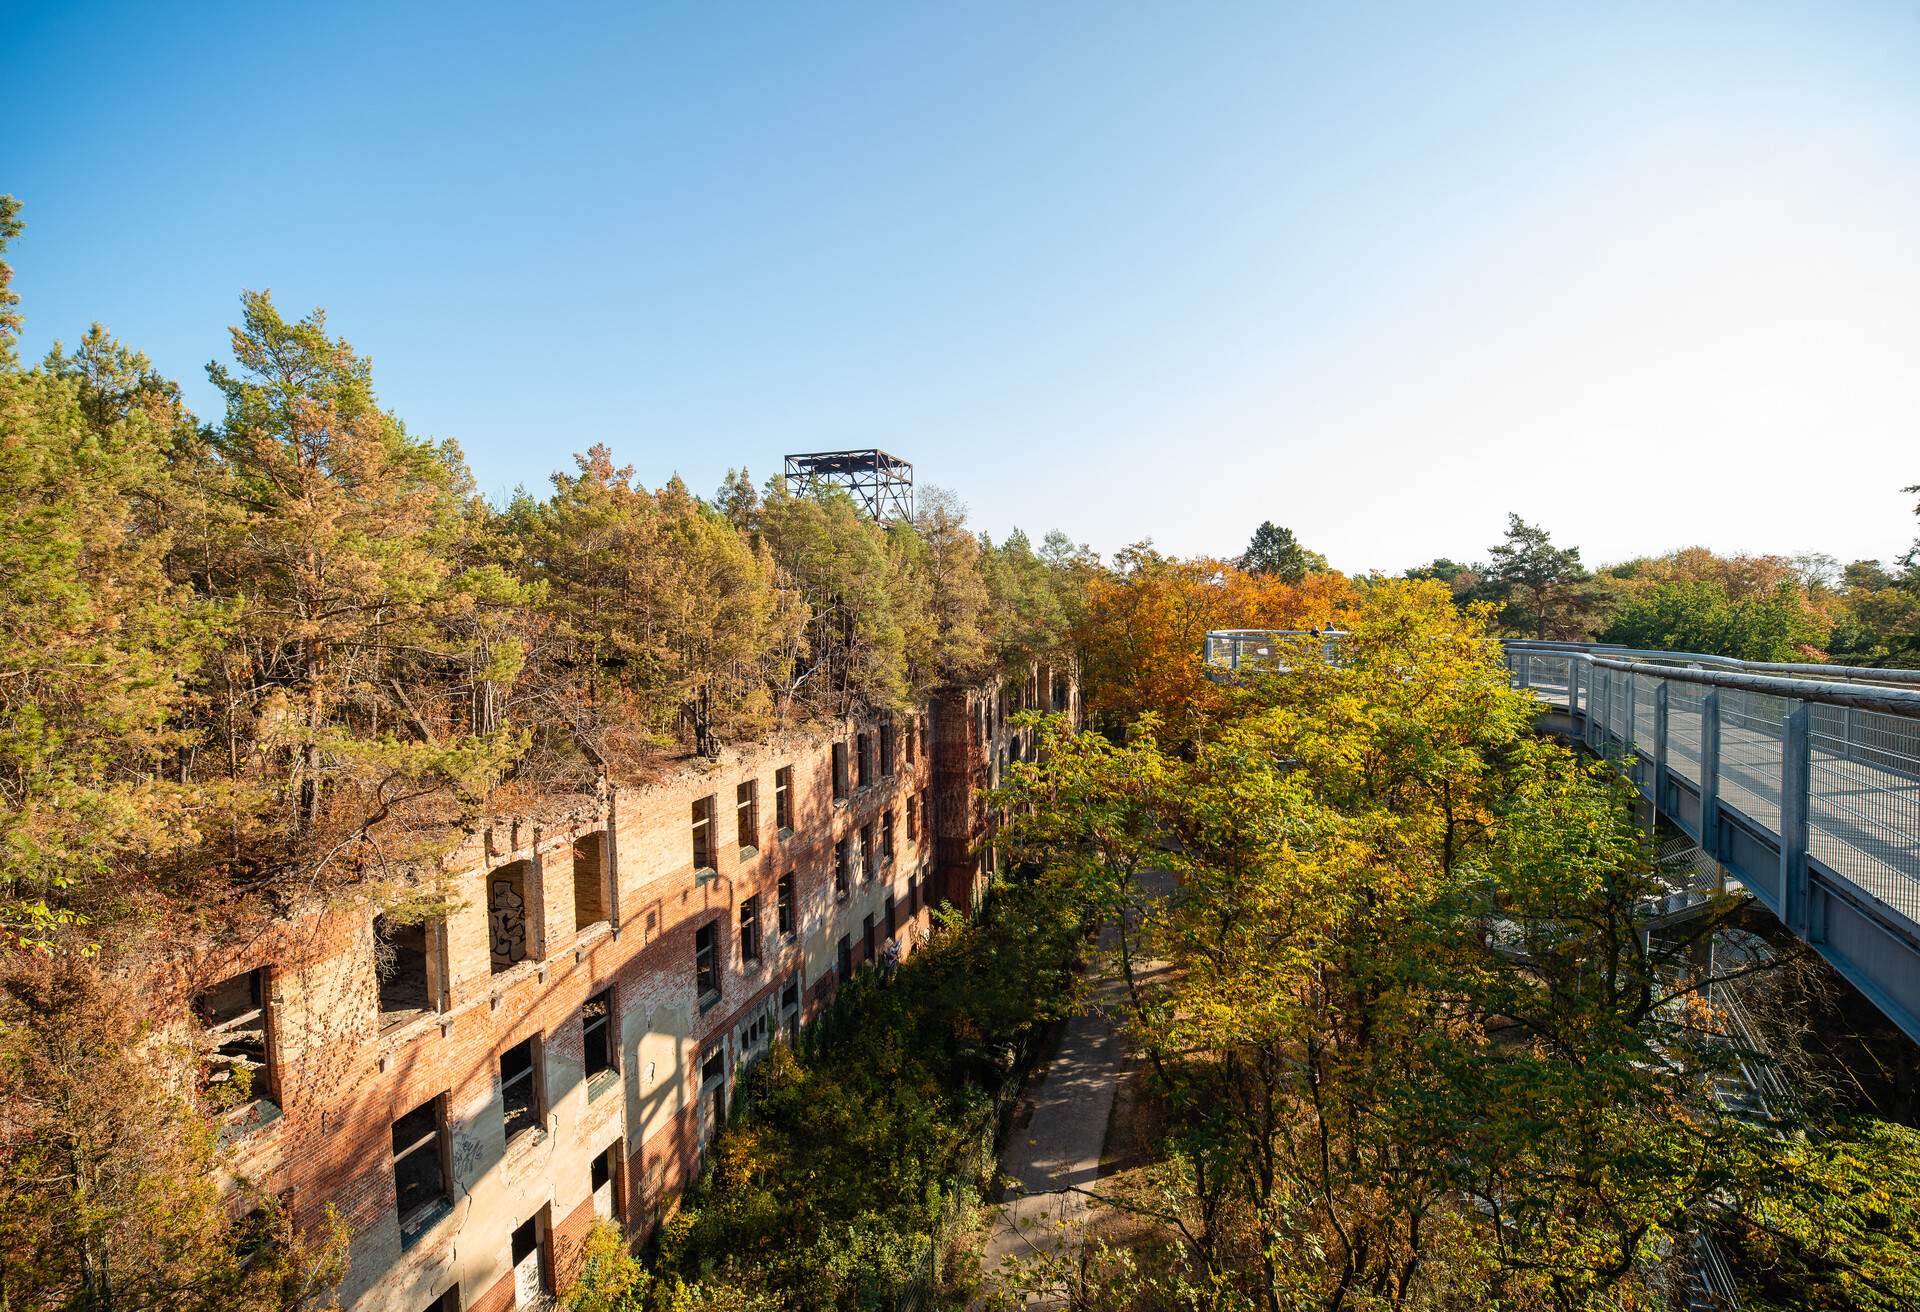 A treetop trail winding through the ruins of a hospital building.